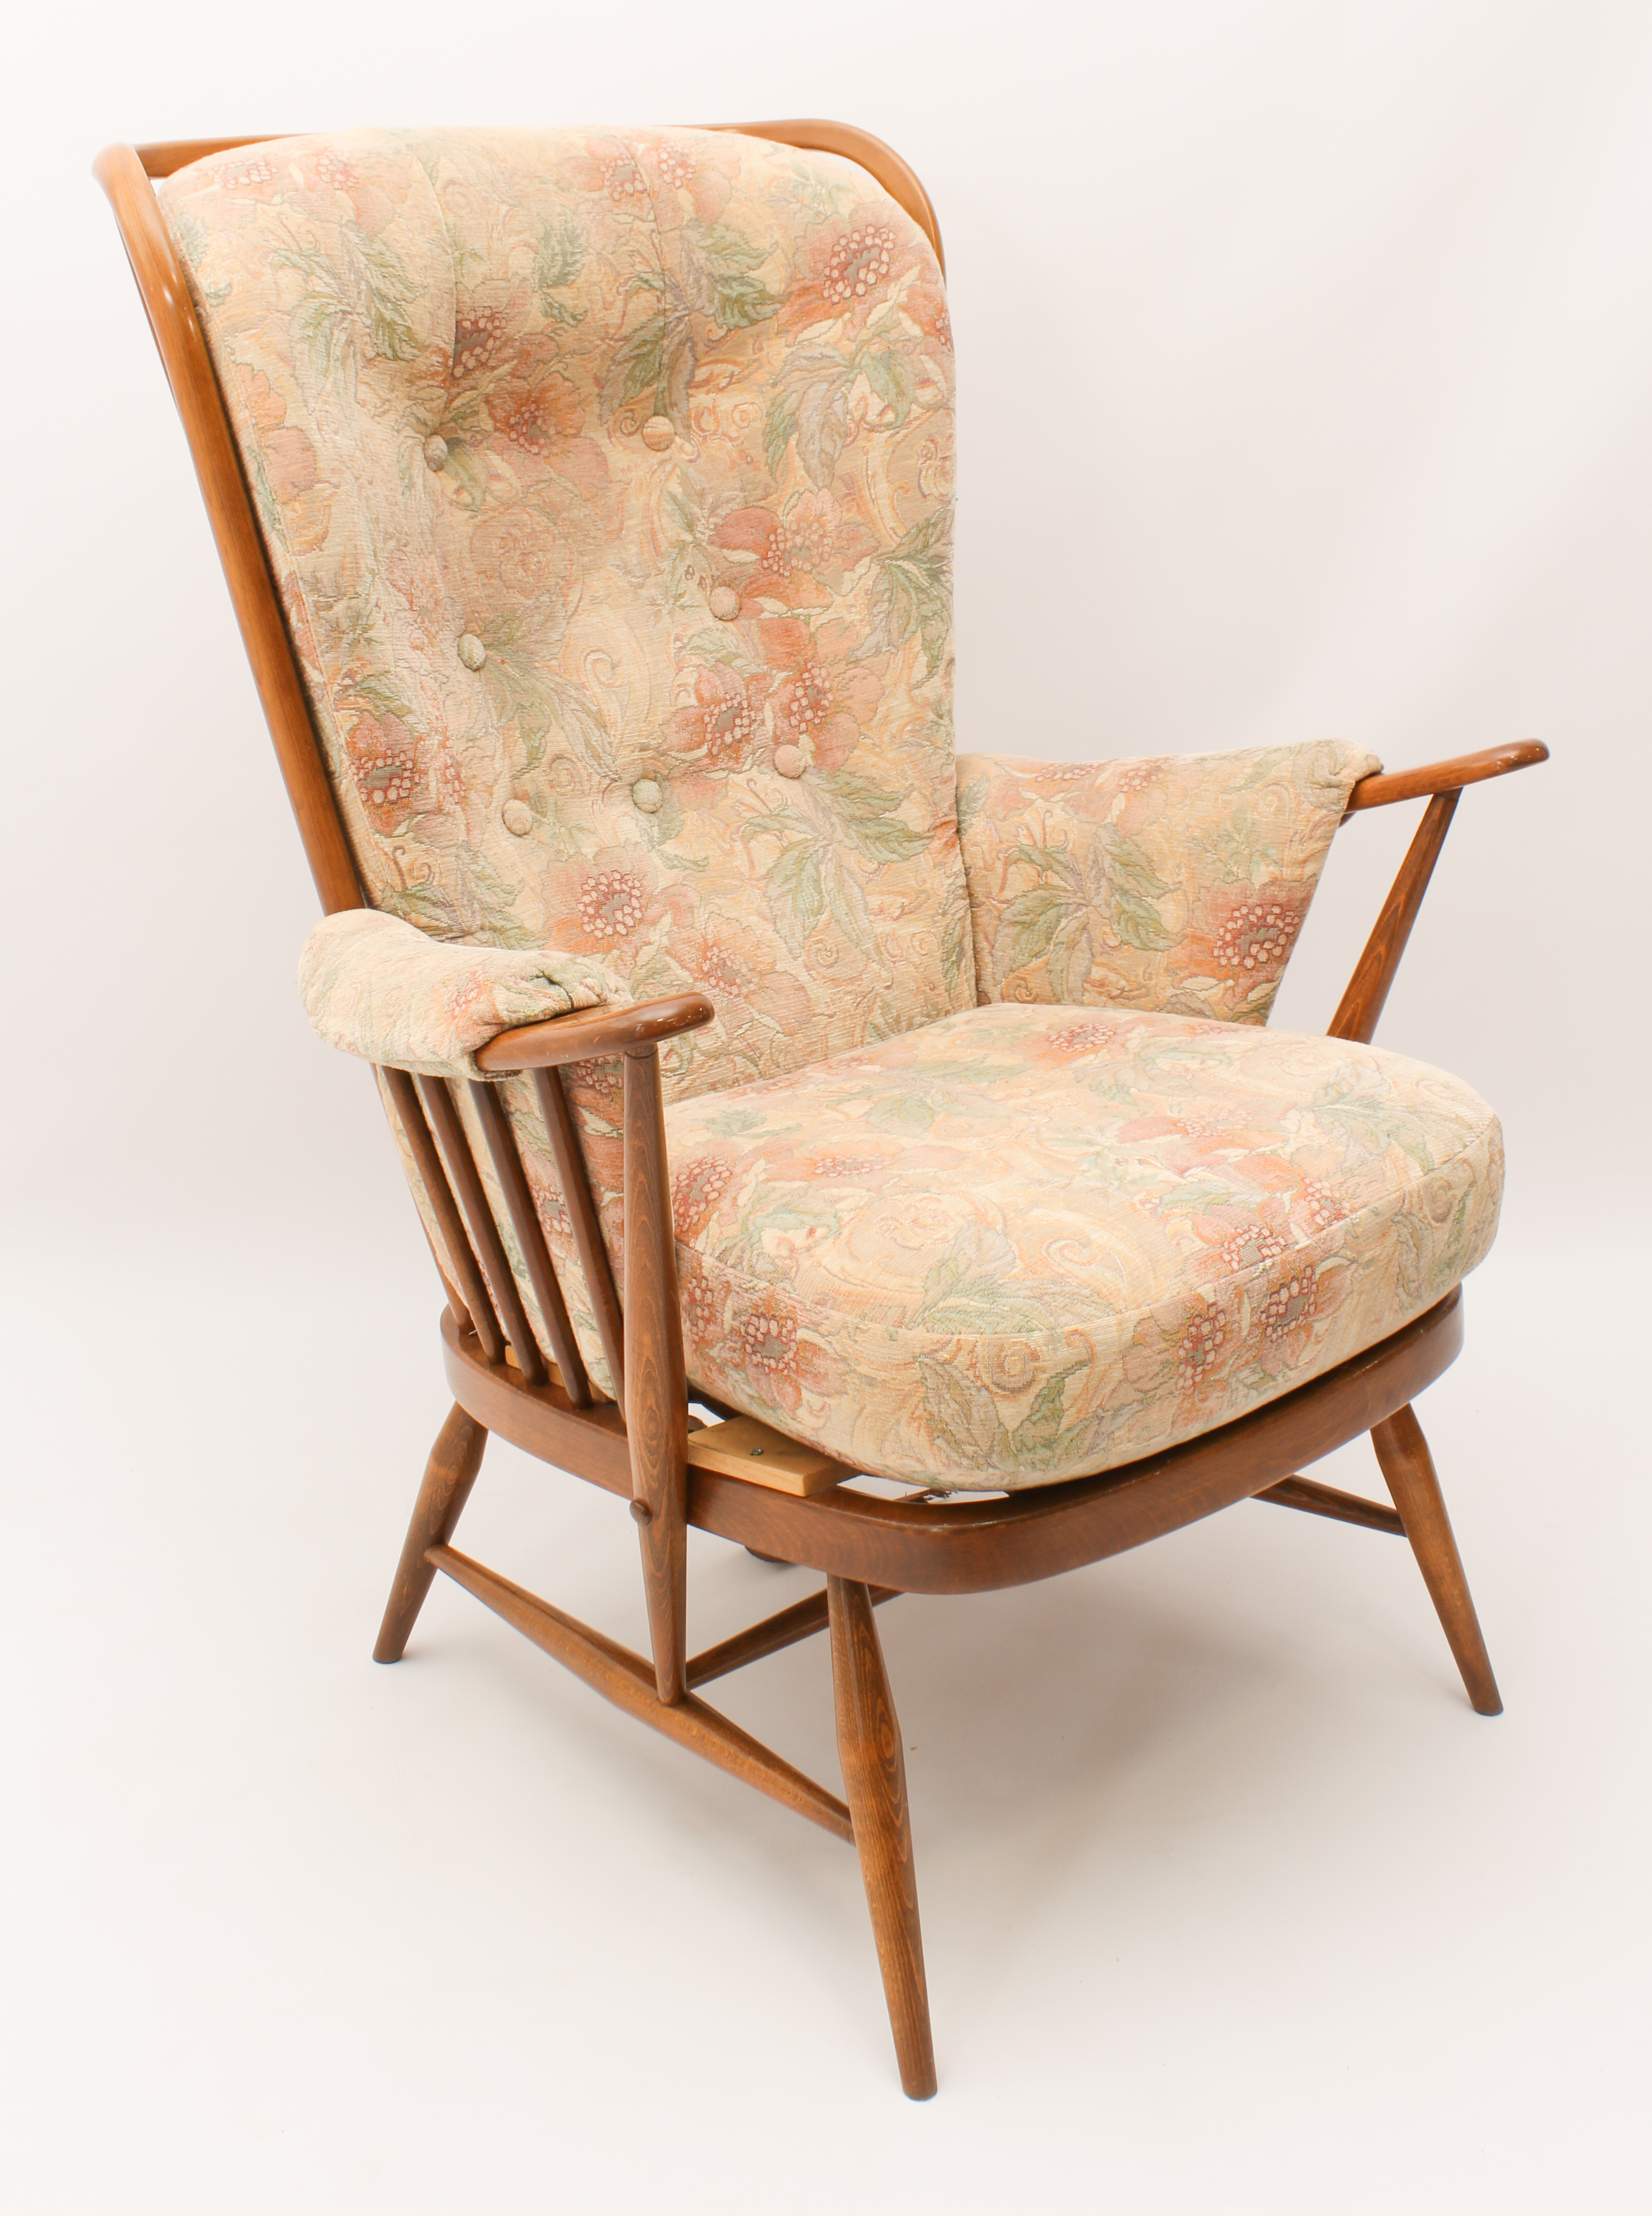 An Ercol Windsor beech wood easy armchair from the Jubilee range - with gold maker's label to